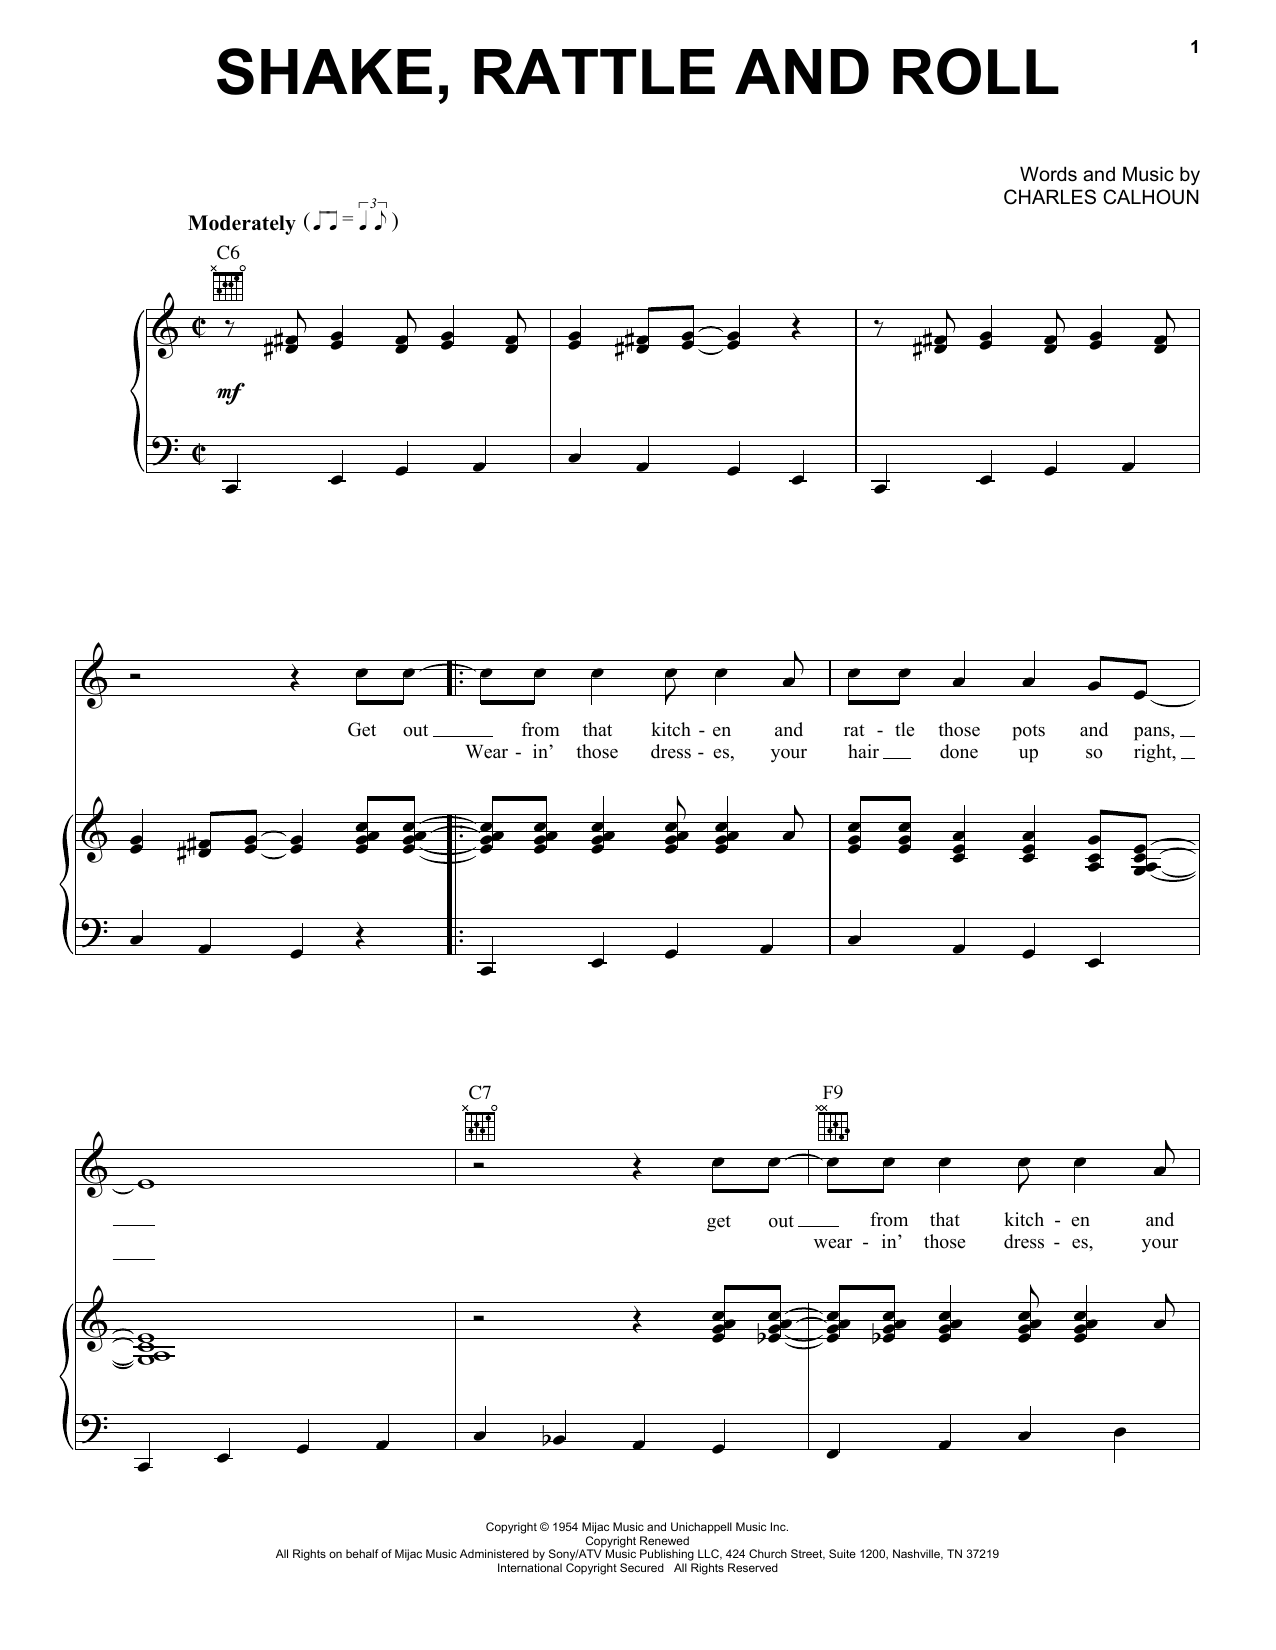 Download Bill Haley Shake, Rattle And Roll Sheet Music